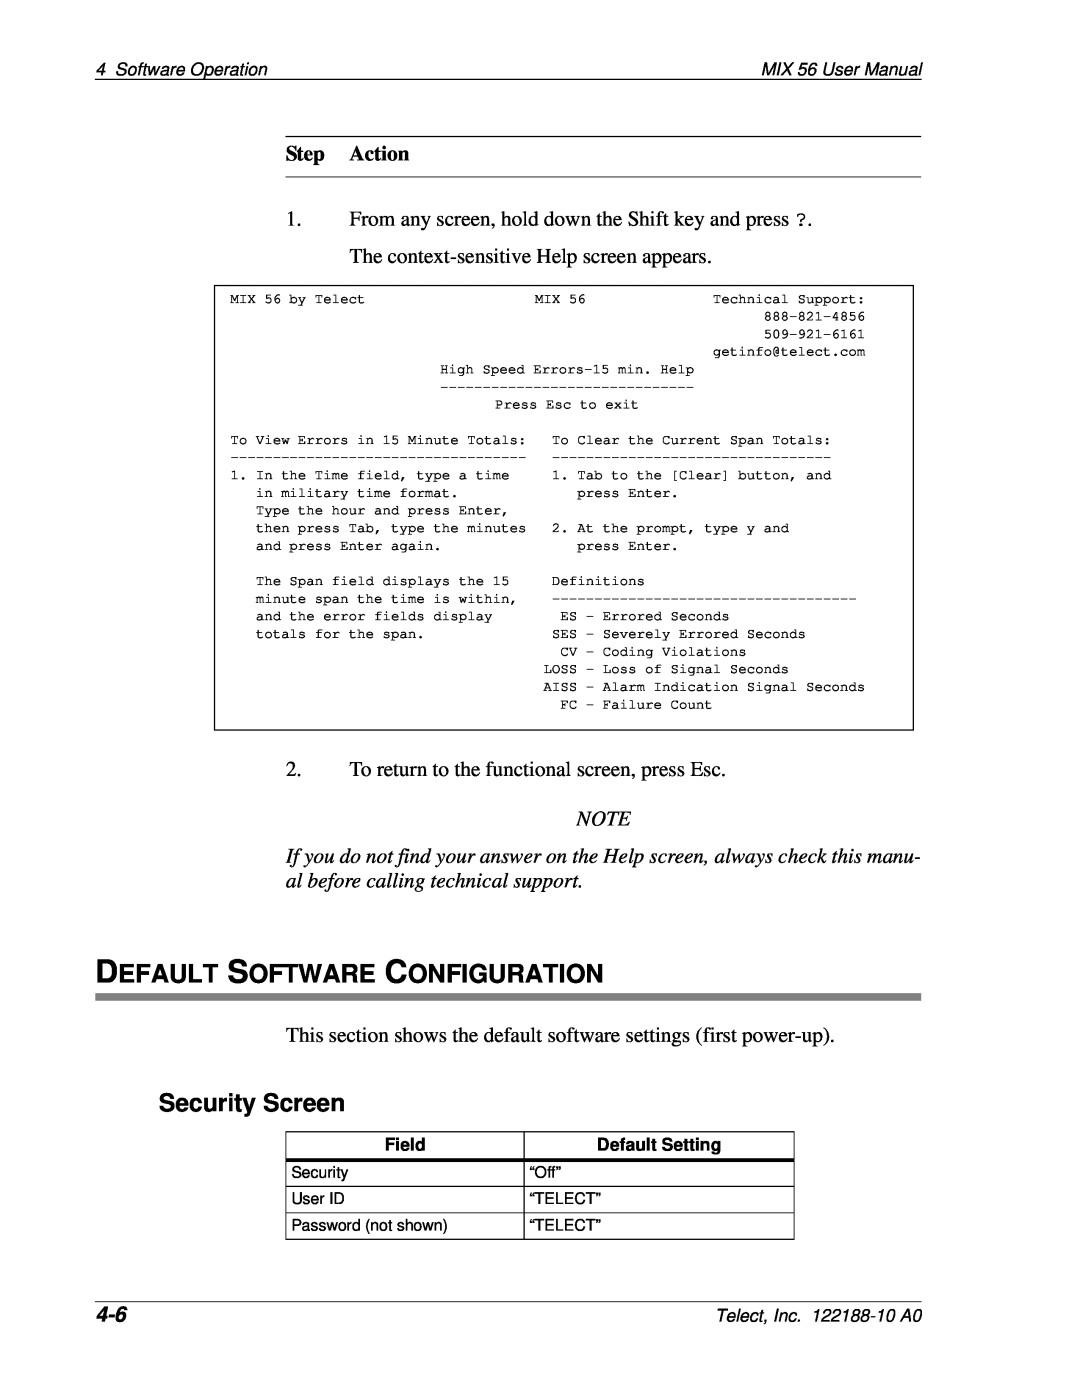 Telect Default Software Configuration, Security Screen, Step Action, Software Operation, MIX 56 User Manual, Field 